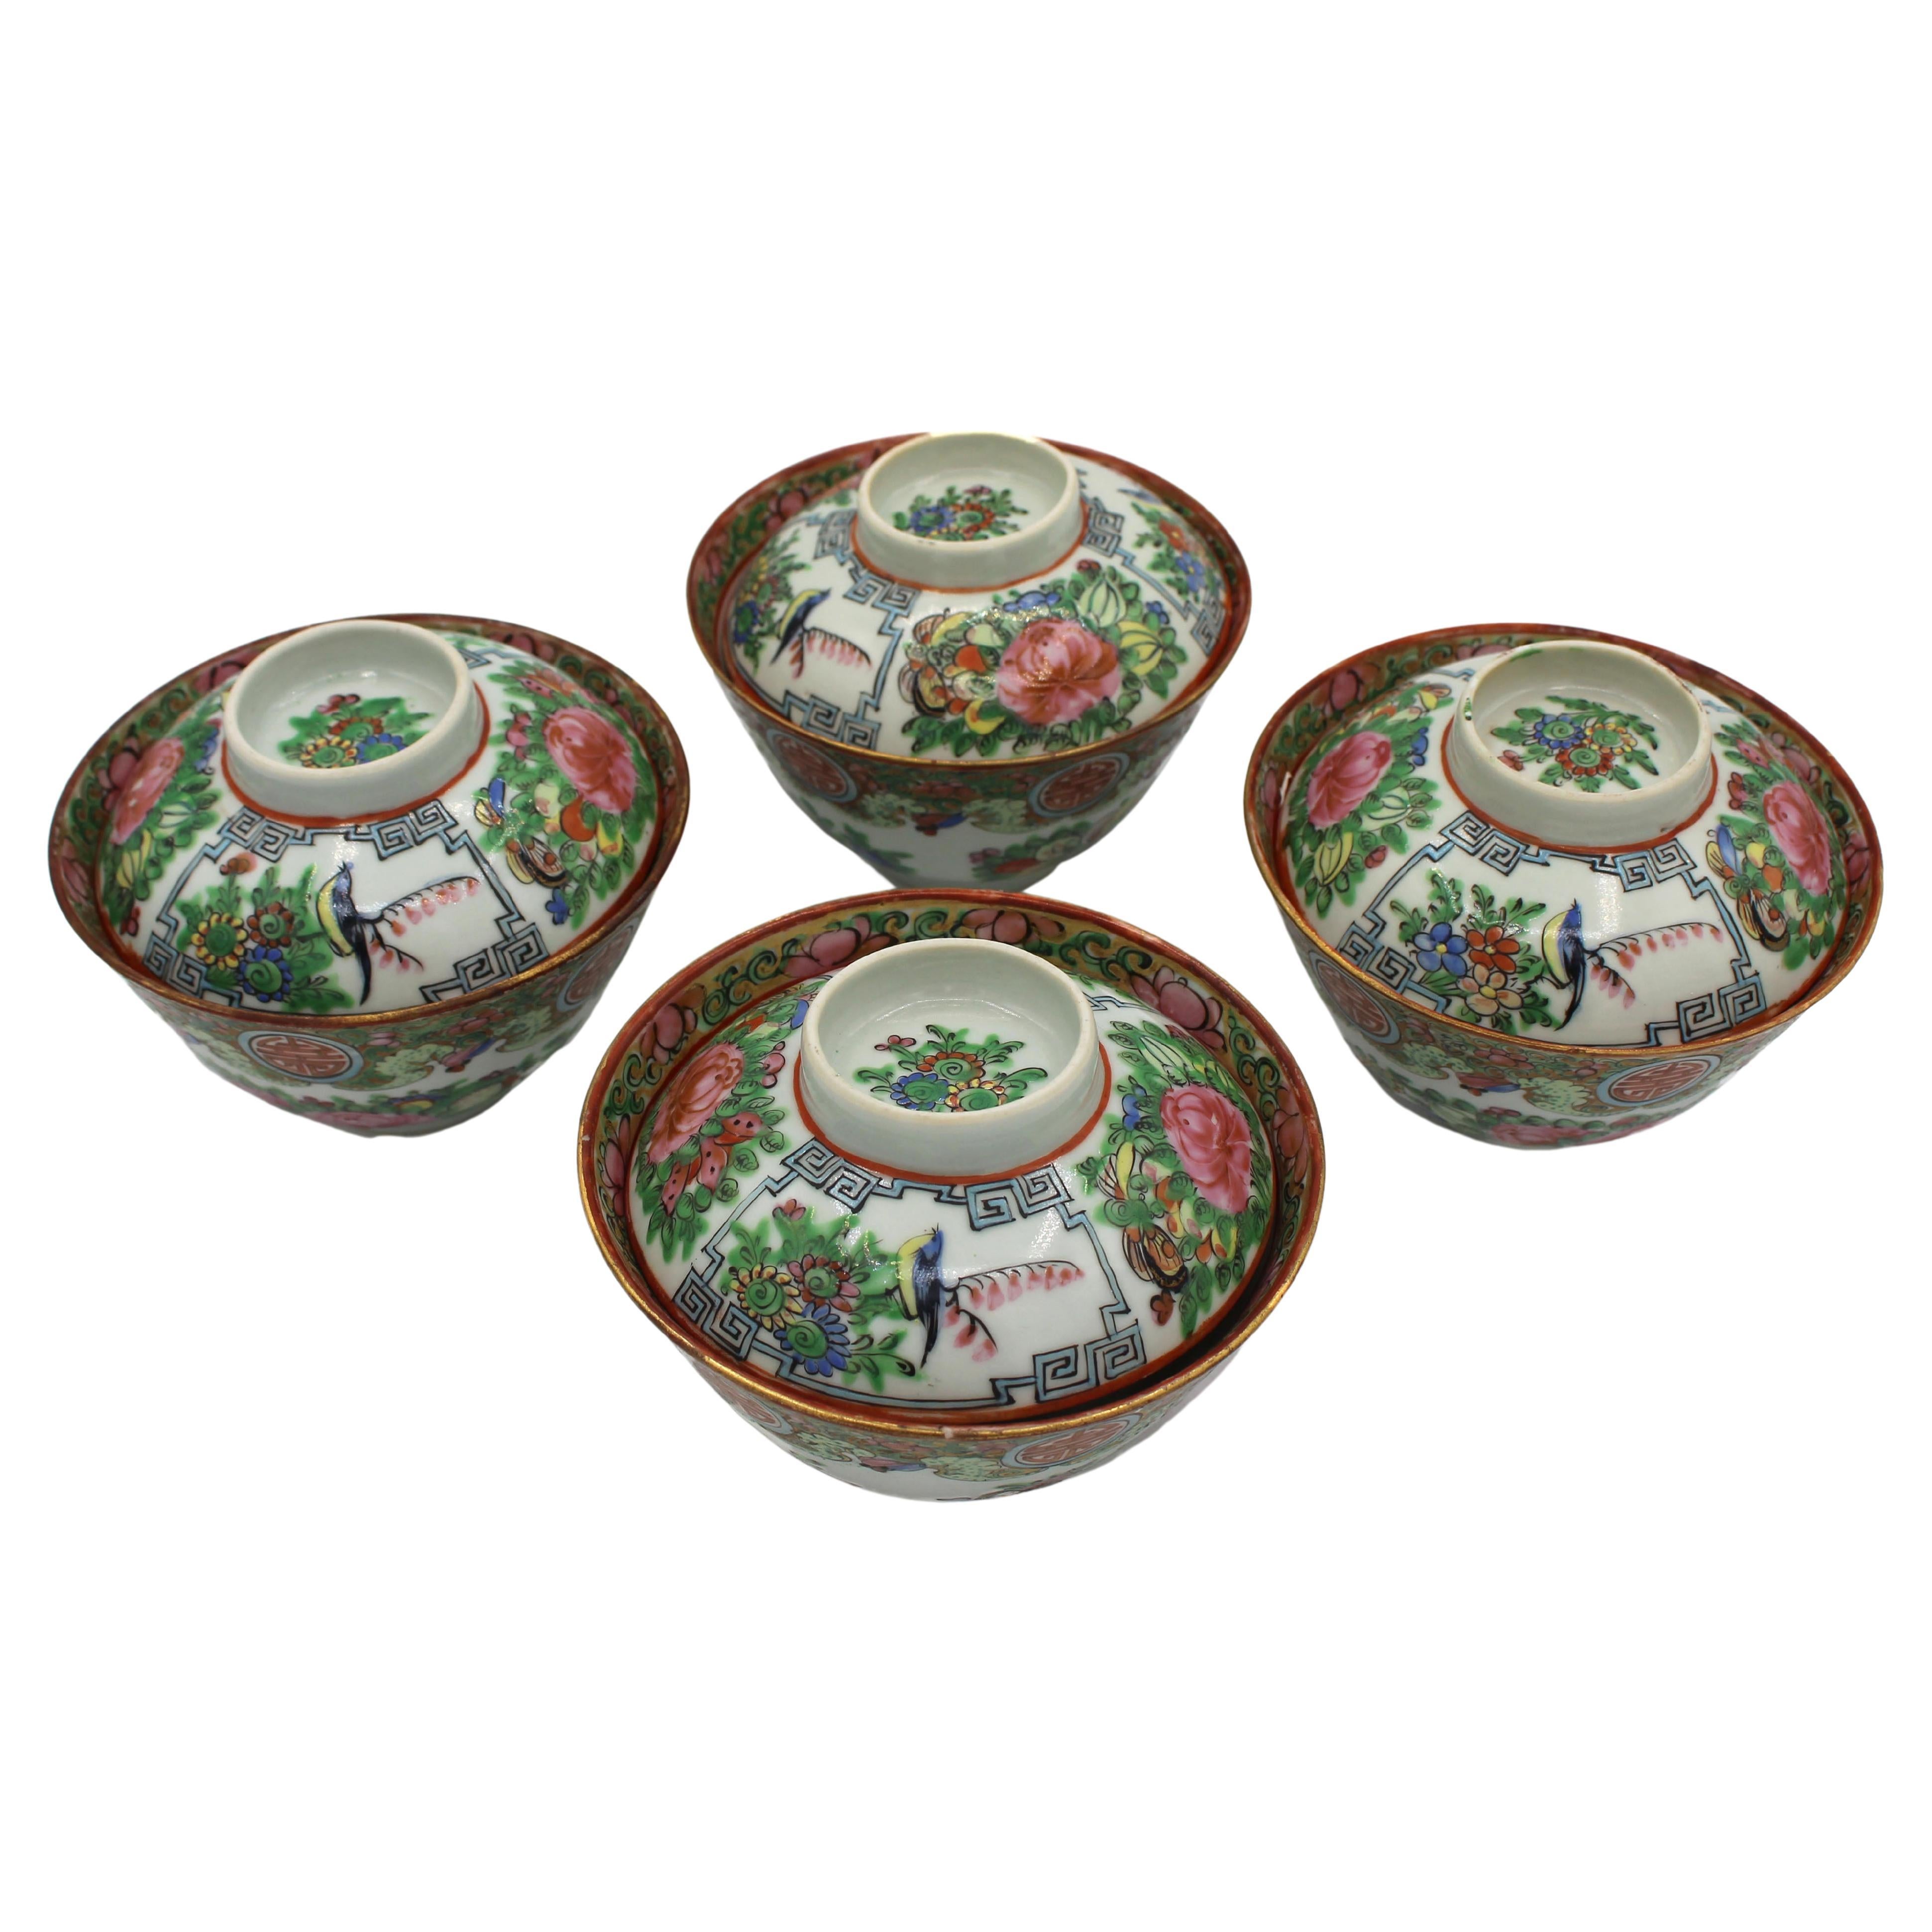 Post-1911 Marks Set of 4 Rose Canton Covered Rice Bowls, Chinese export